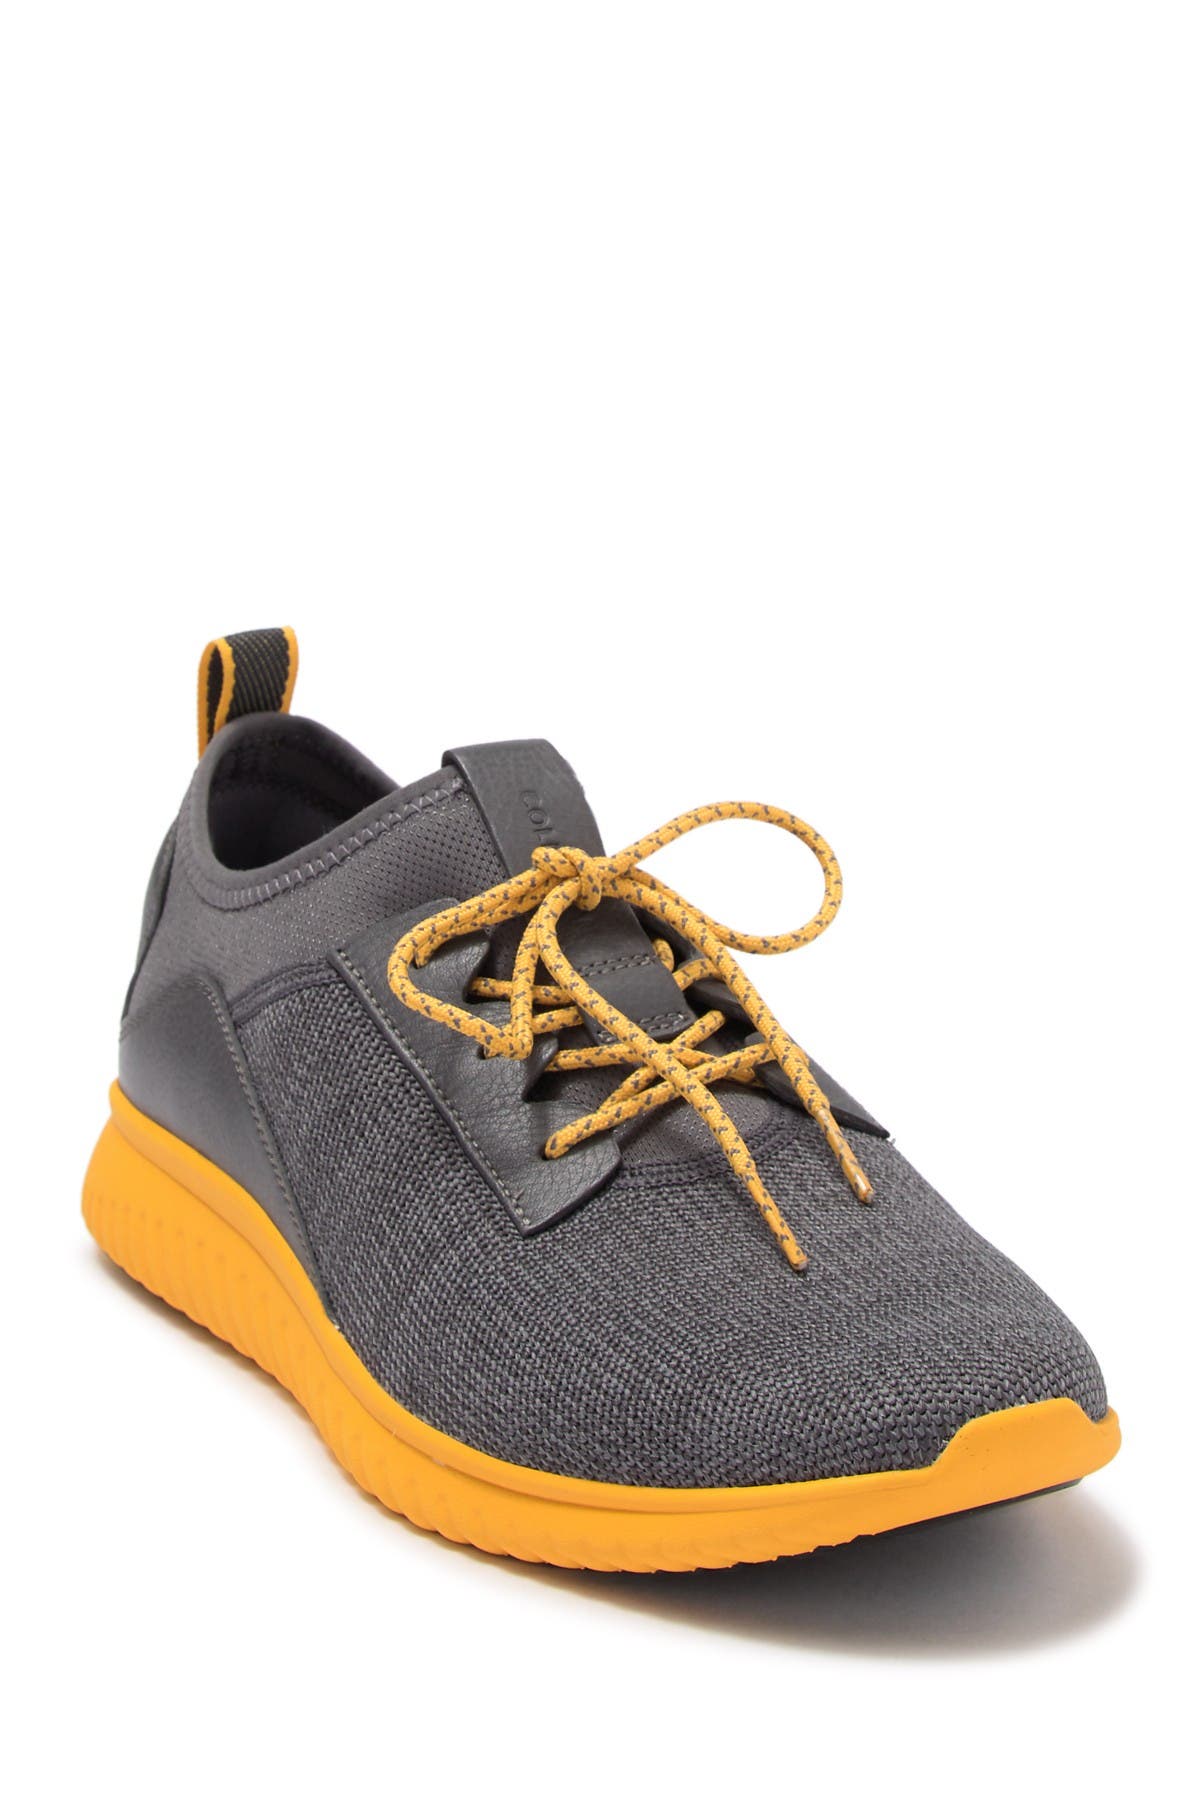 cole haan grand motion shoes